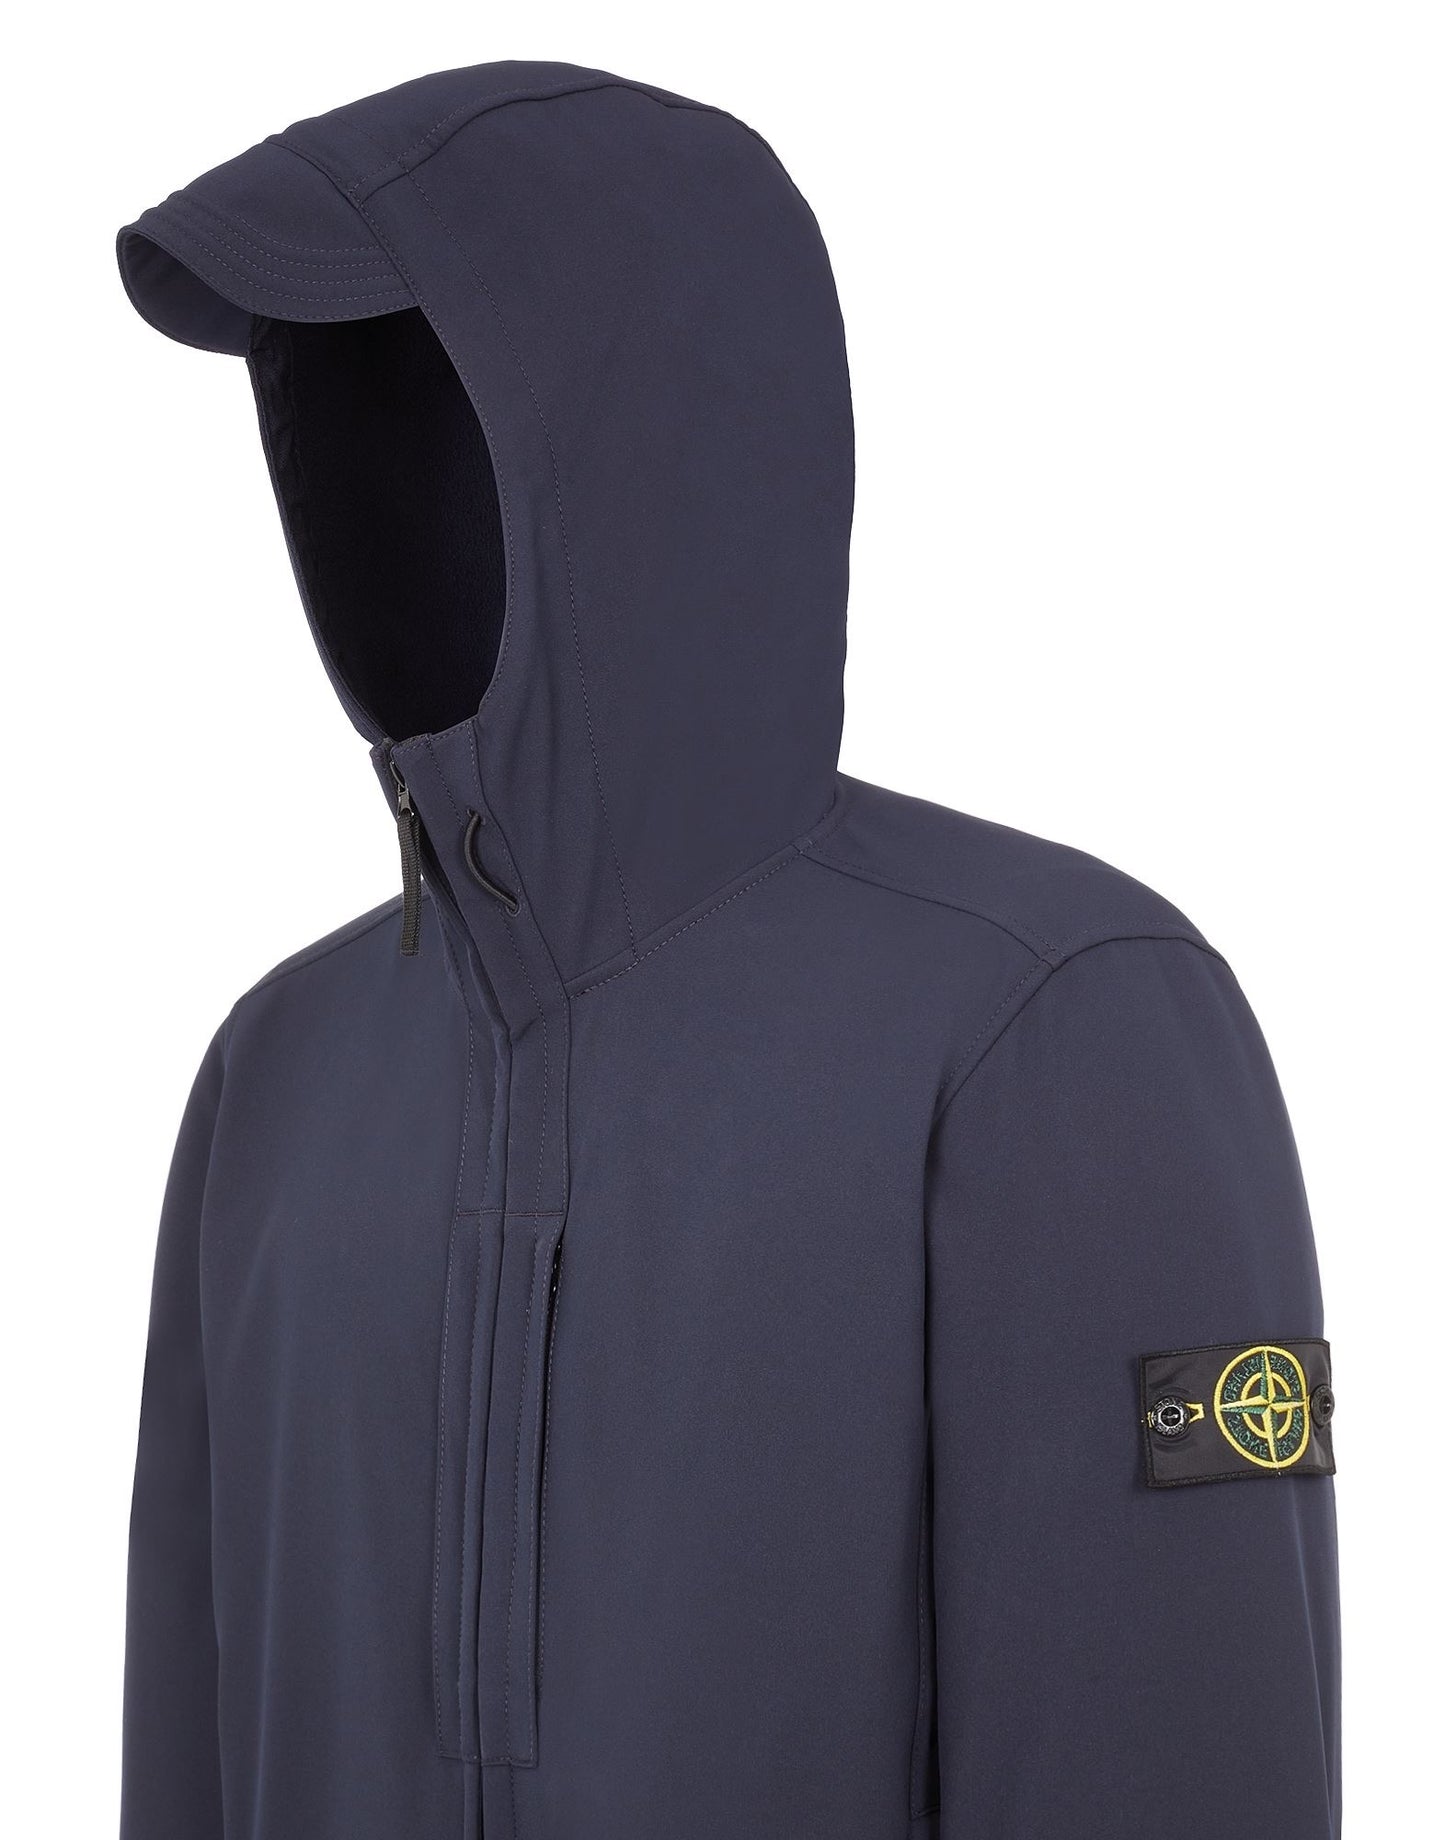 Stone Island Q0122 SOFT SHELL-R_E.DYE® TECHNOLOGY IN RECYCLED POLYESTER Jacket